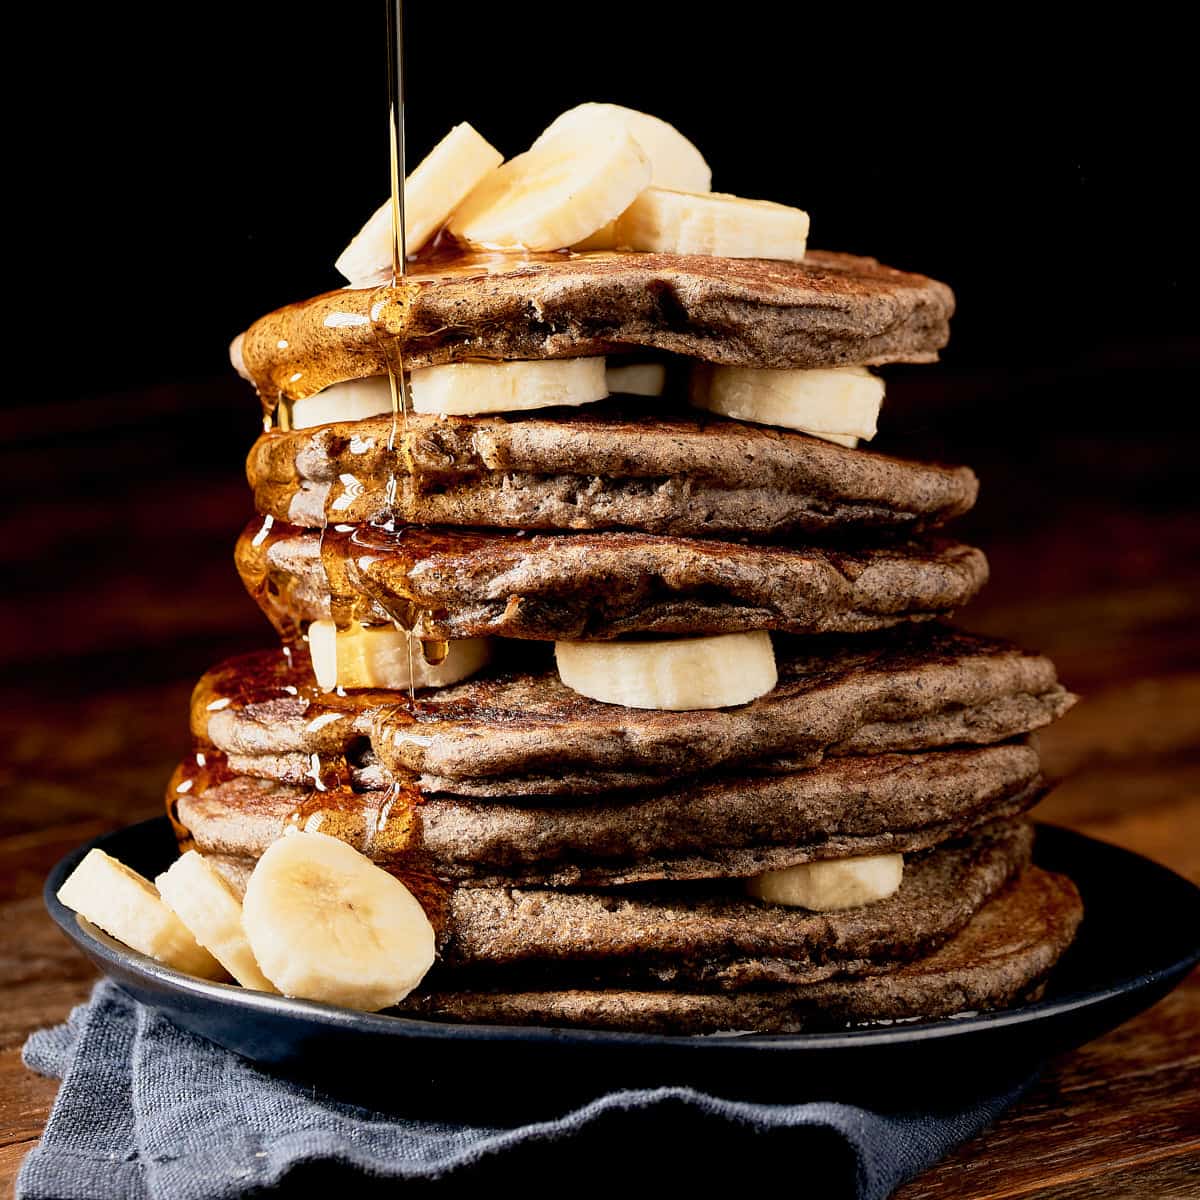 Side view of stack of buckwheat sourdough pancakes with bananas.